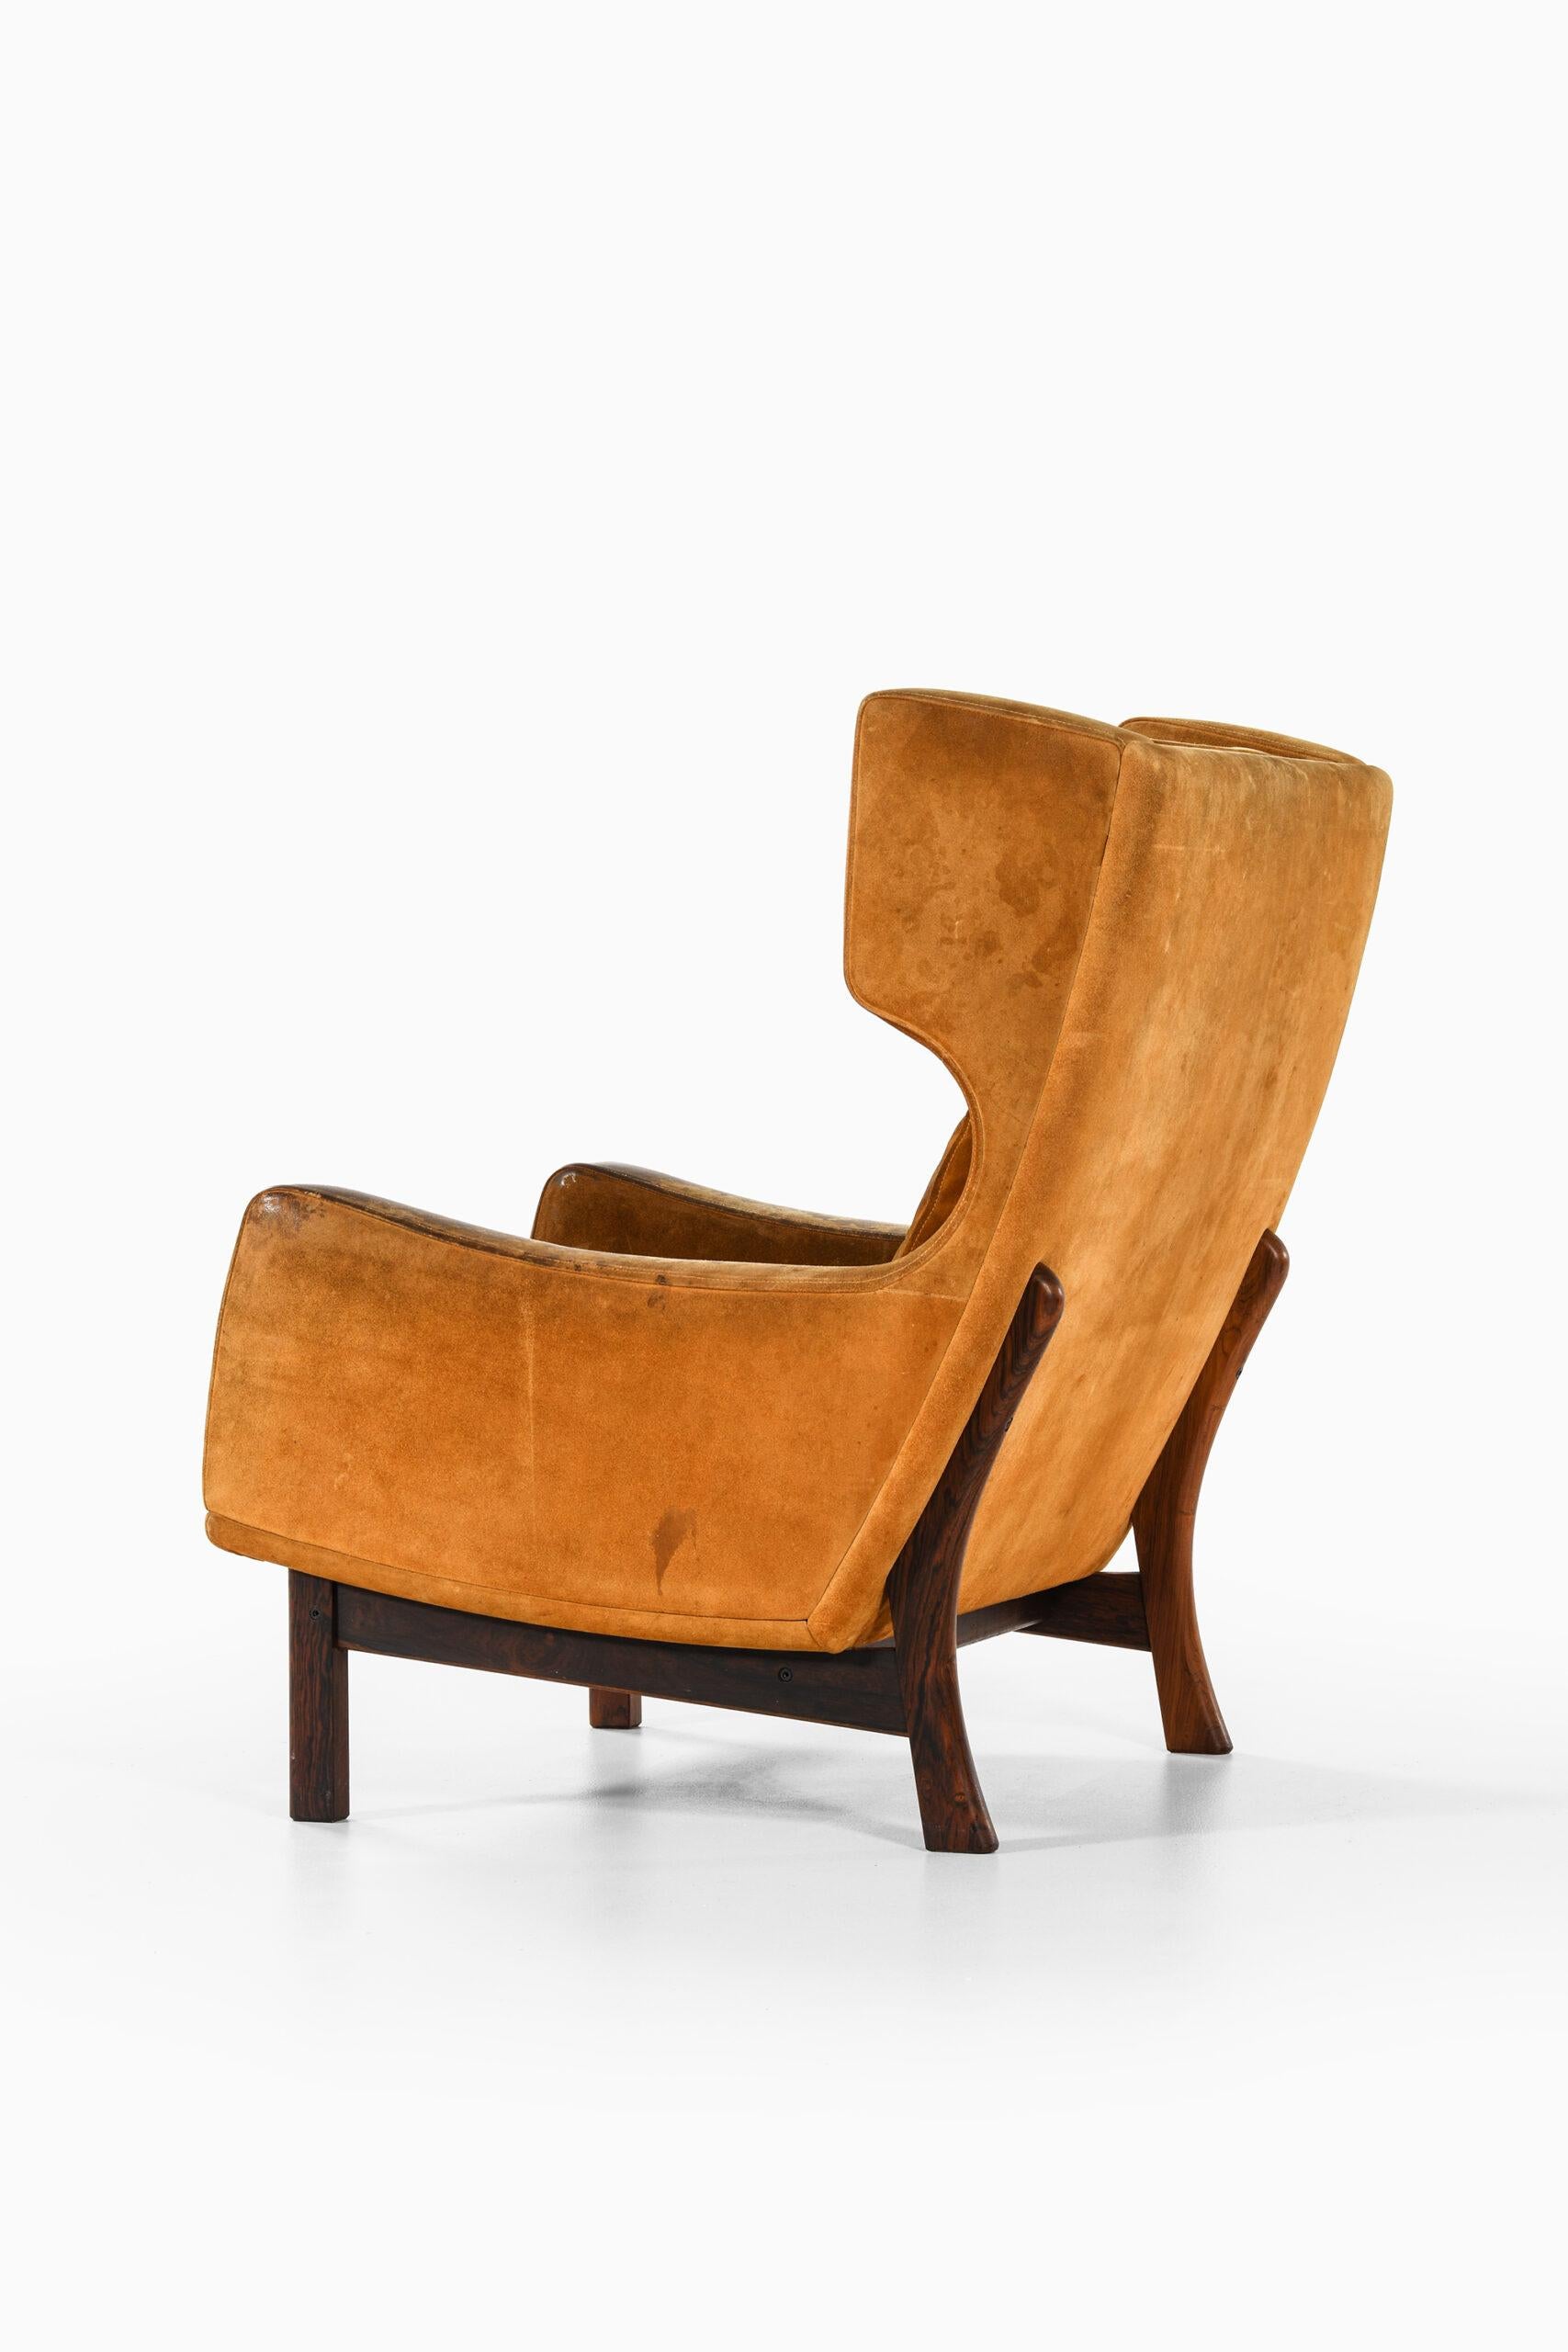 Mid-20th Century Easy Chair Produced in Denmark For Sale